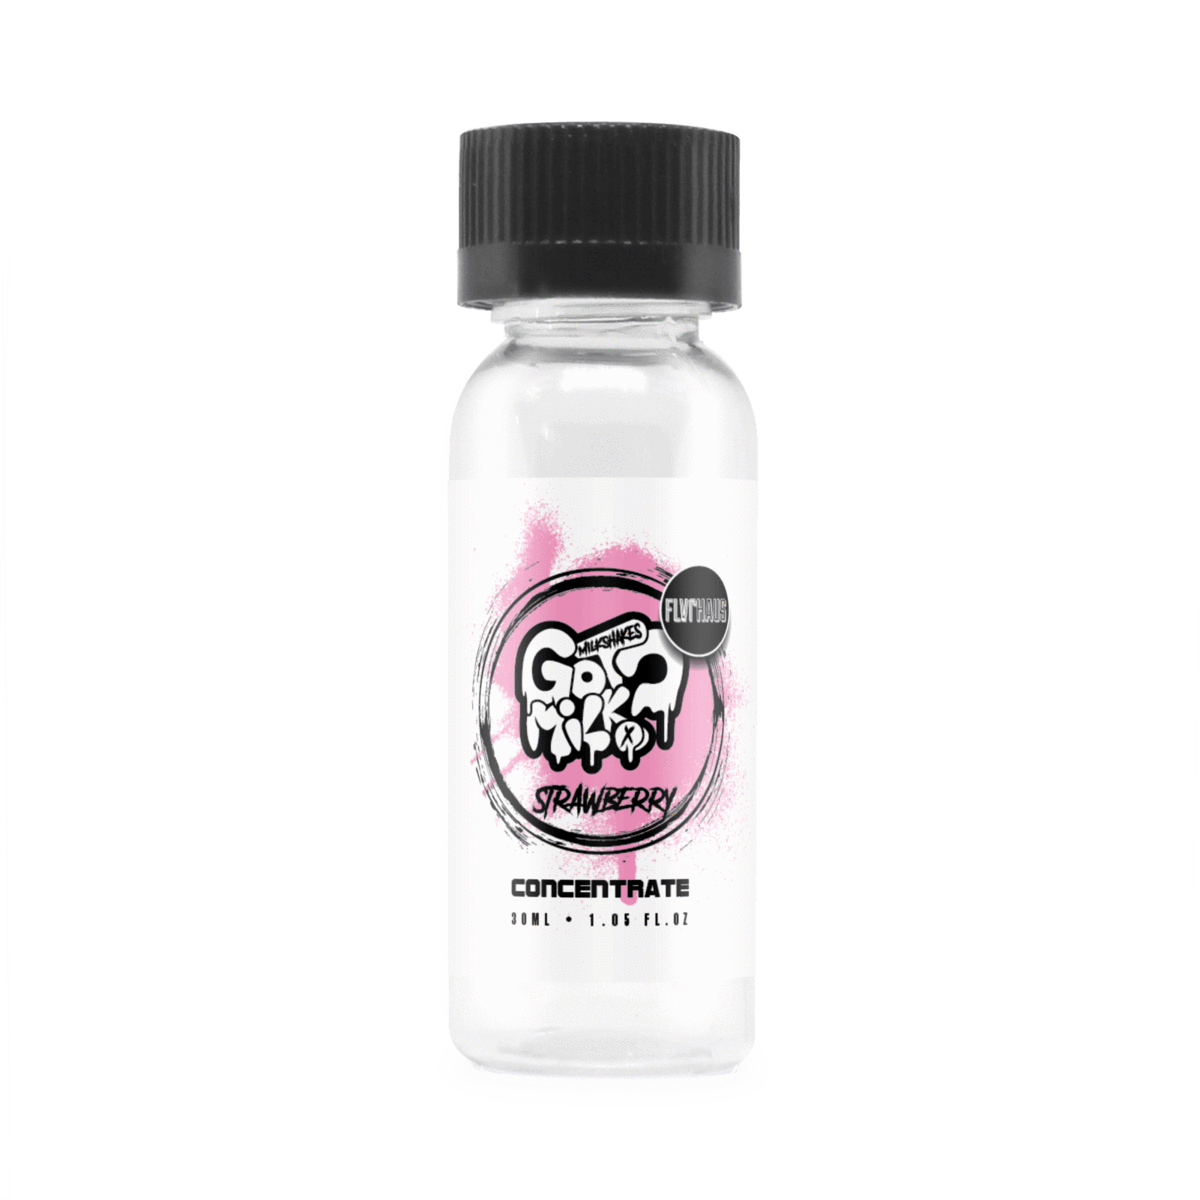 Strawberry Flavour Concentrate by Got Milk?